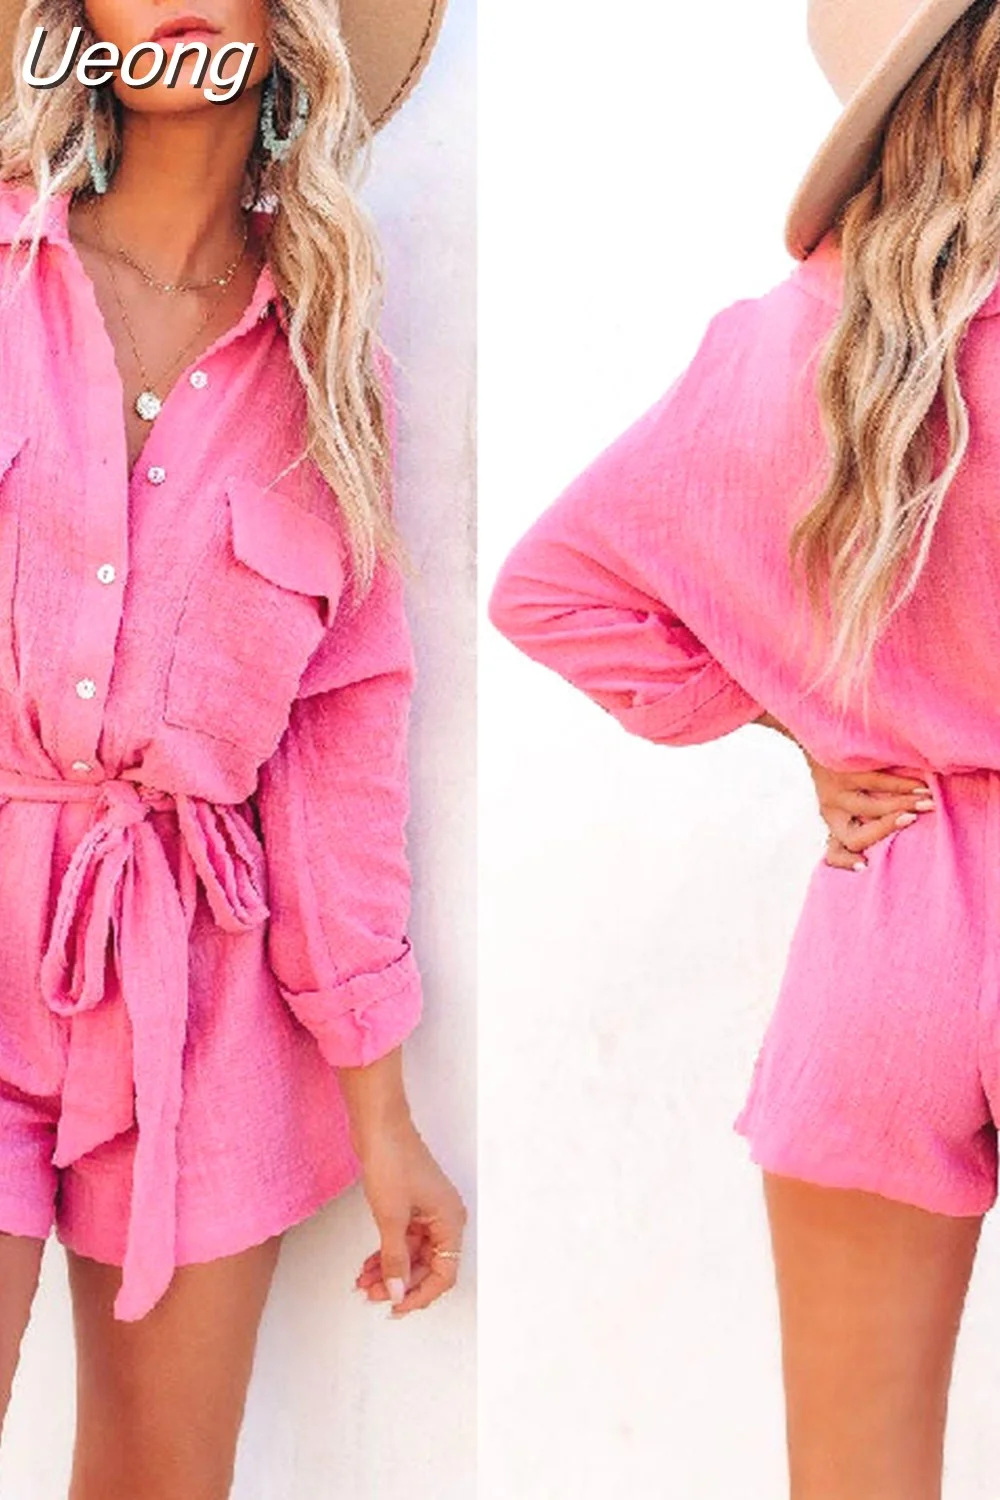 Ueong Summer Pink Long Sleeve Pockets Belt Romper Single-breasted Cool Jumpsuit Romper High Street Overall Fashion Romper